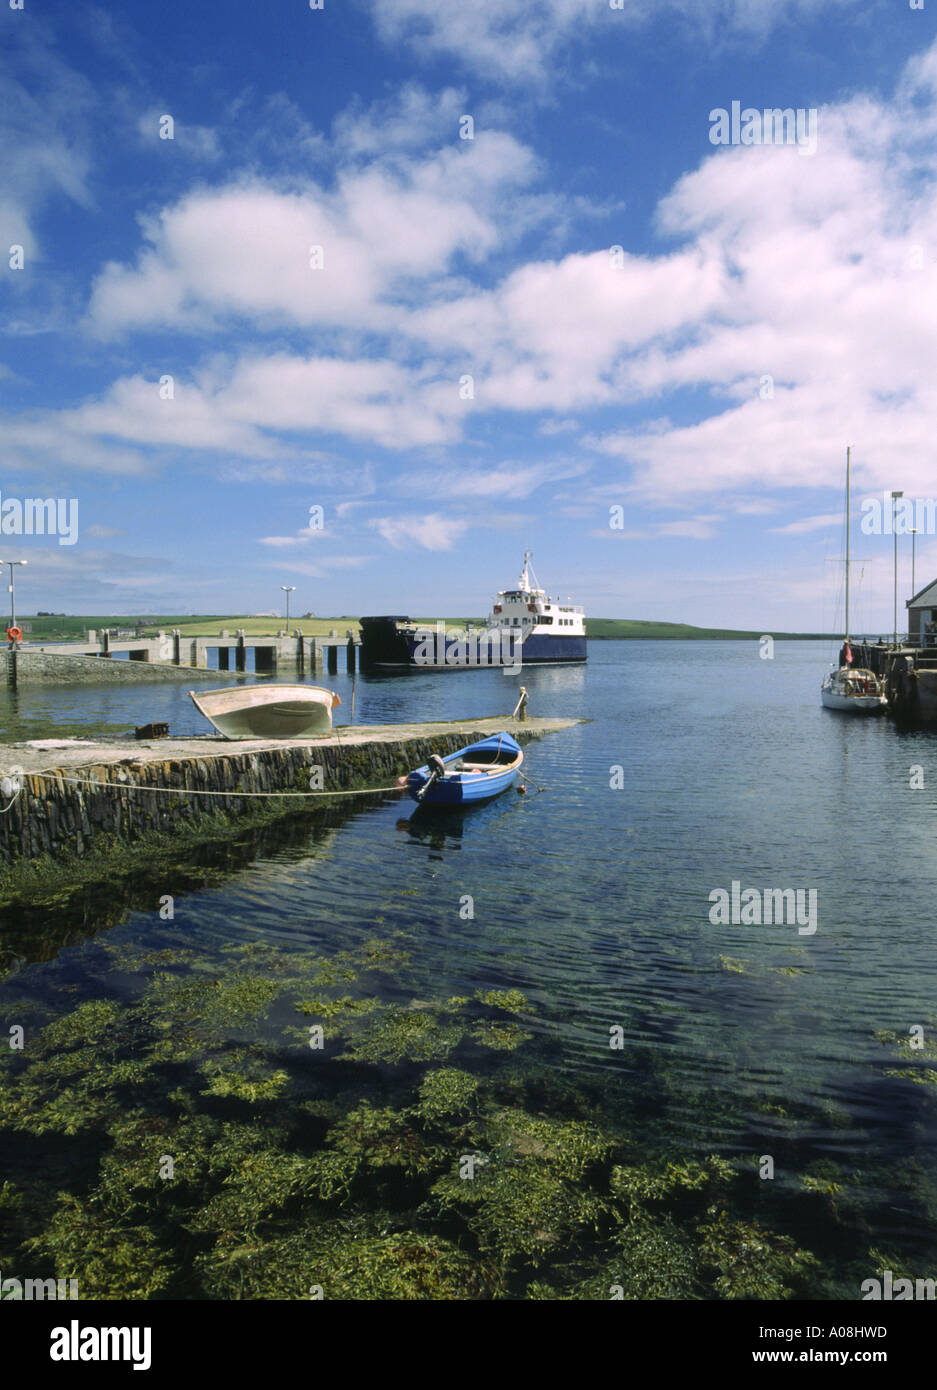 dh Ferry Harbour SHAPINSAY ISLAND ORKNEY ISLES Stone quay boat ferries quayside scotland highlands islands Stock Photo